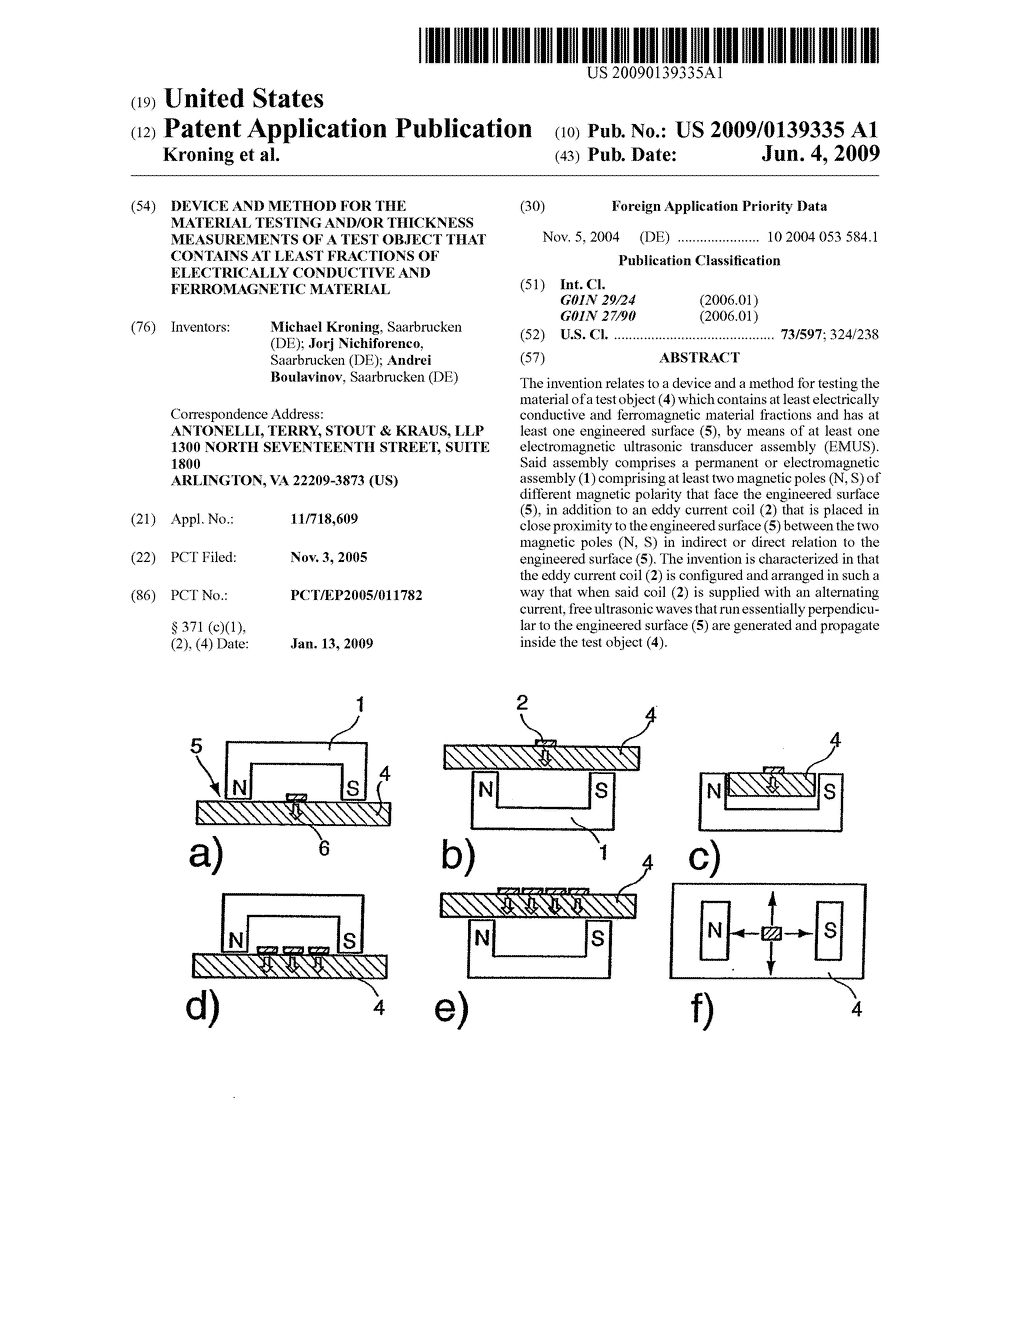 Device and Method for the Material Testing and/or Thickness Measurements of a Test Object That Contains at Least Fractions of Electrically Conductive and Ferromagnetic Material - diagram, schematic, and image 01